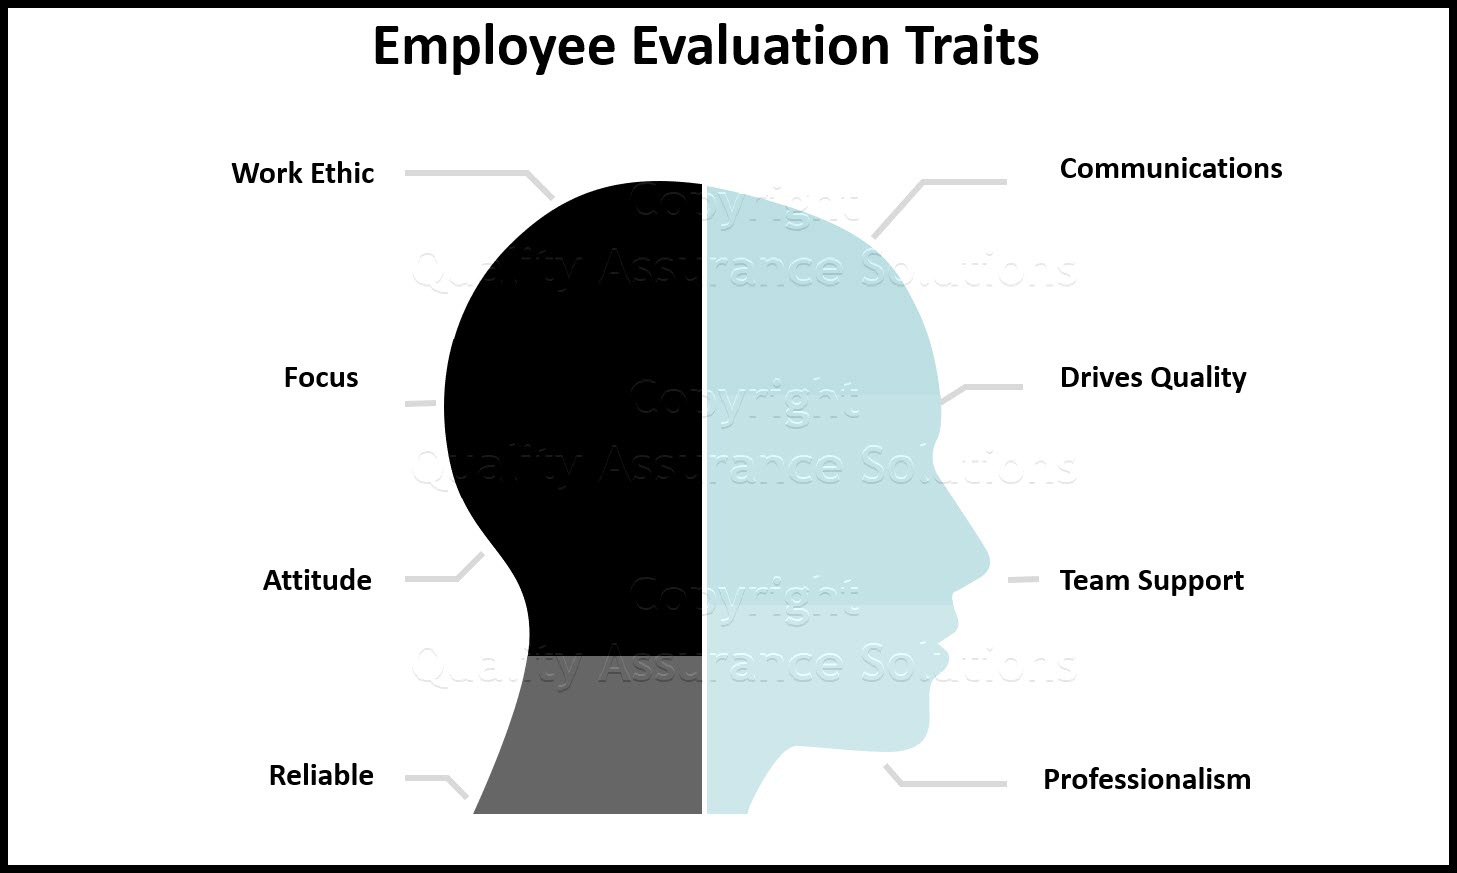 Download our free employee evaluation software spreadsheet. Learn about hiring, post hiring, evaluating and ranking employees. 